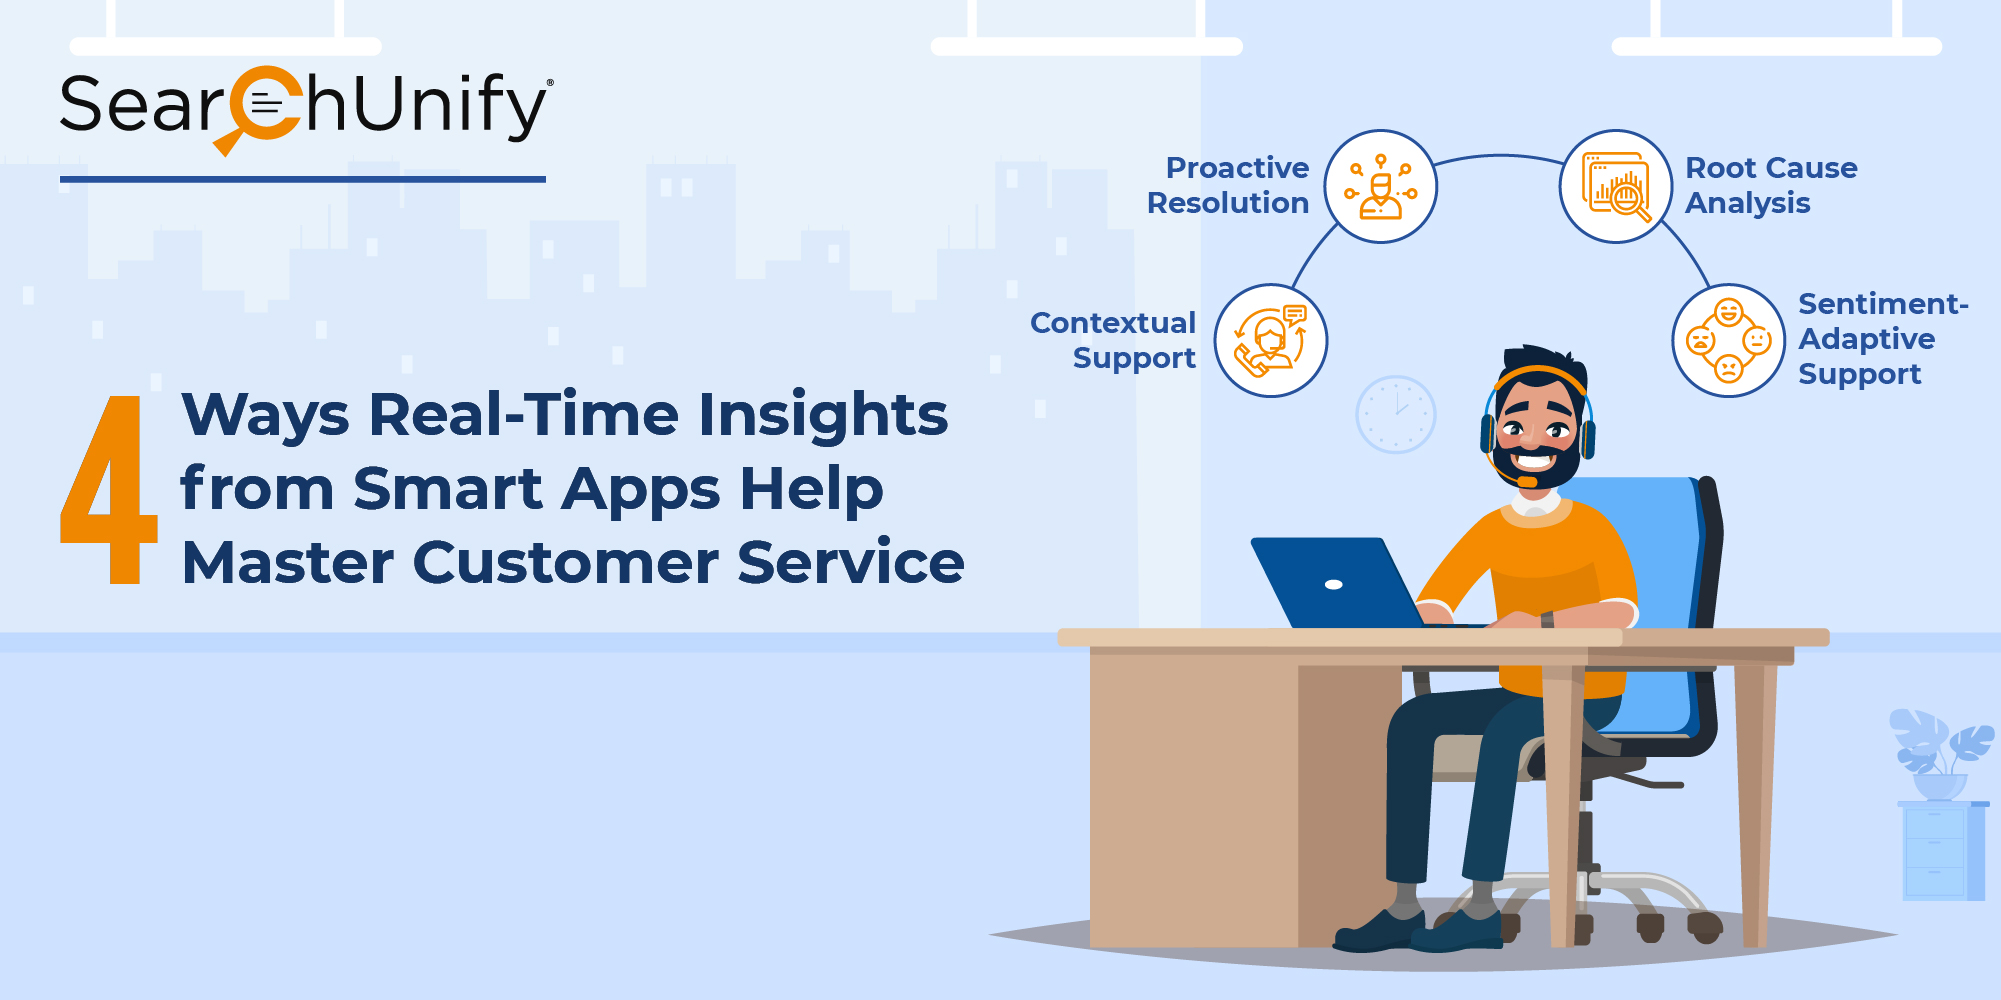 Customer Support, Analytics, AI-Powered Support Applications